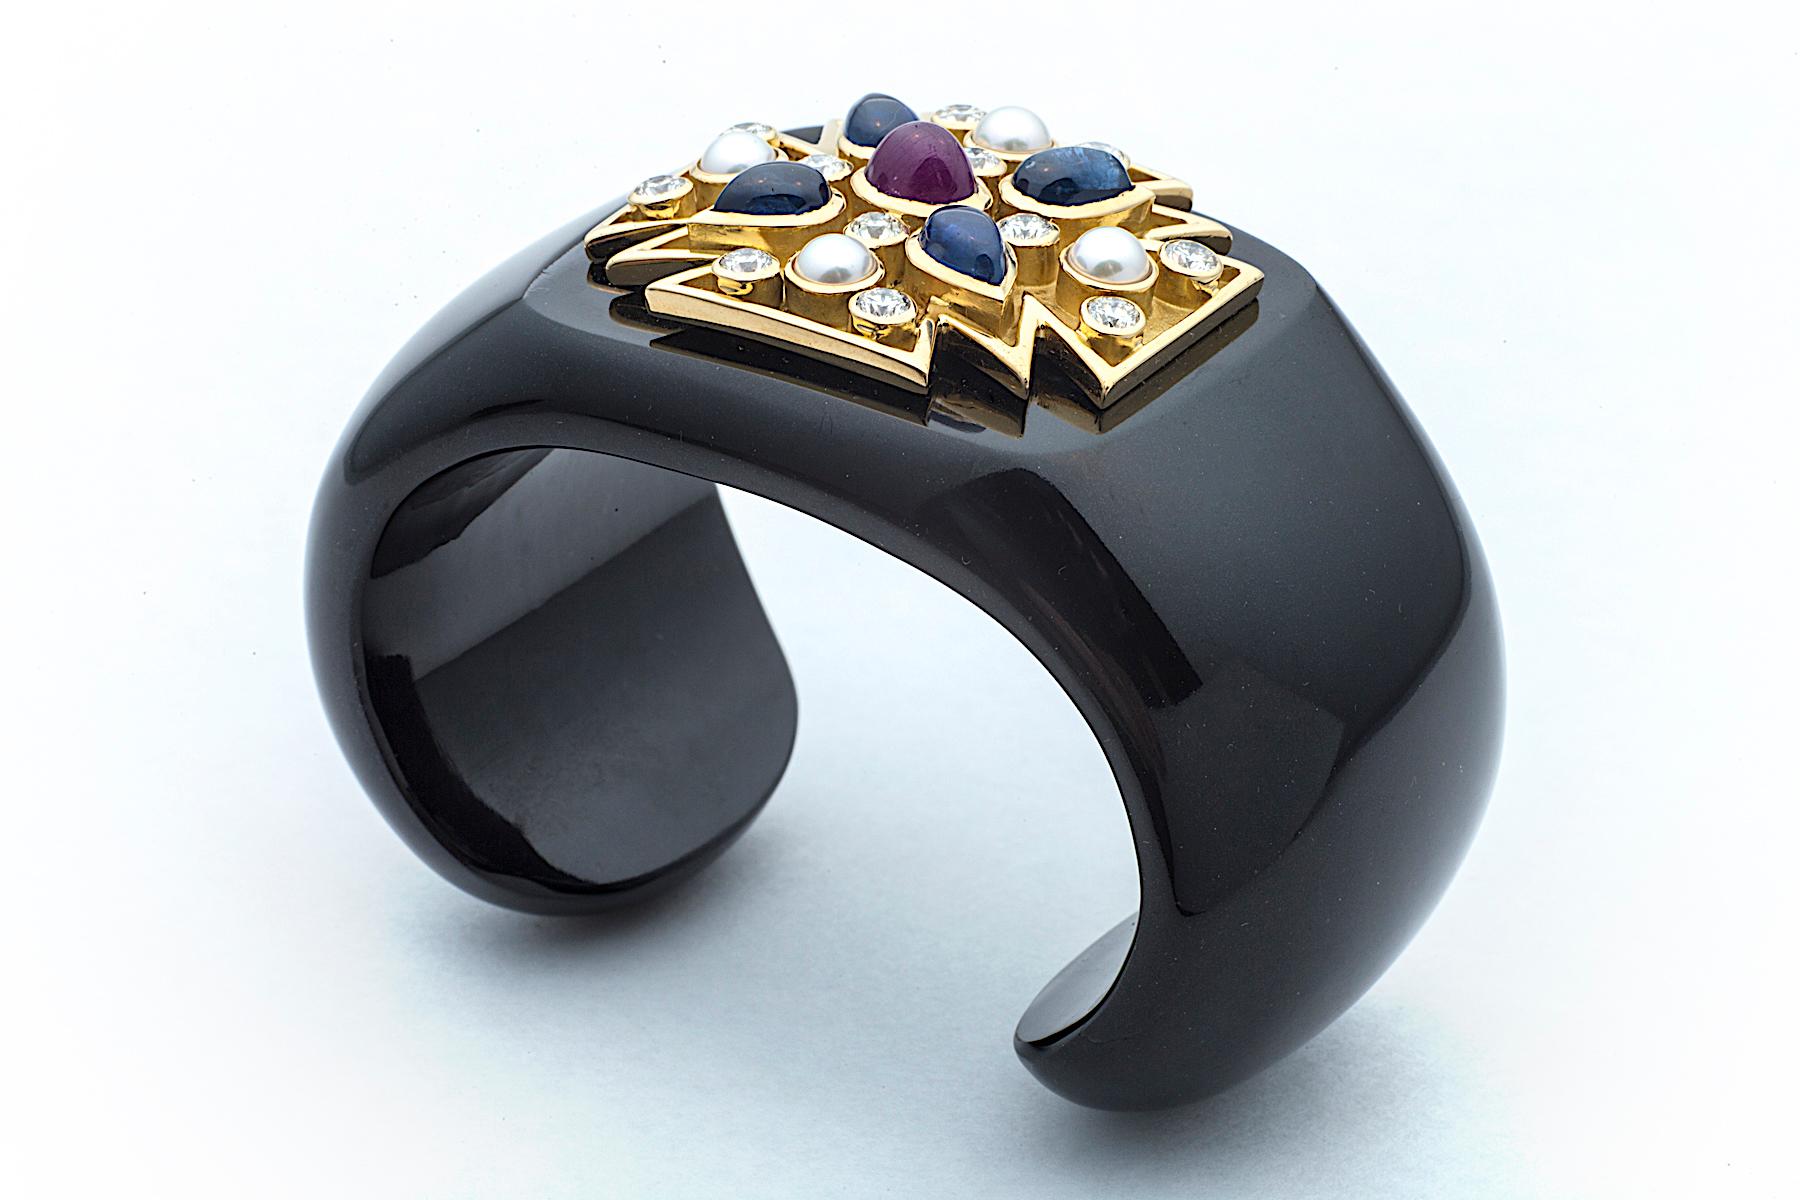 The Maltese cross symbolizes protection and a badge of honor and you will possess both when wearing this iconic Verdura statement cuff.  Designed of shiny rich black carved jade, this fashionable cuff showcases an 18K yellow gold Maltese cross set